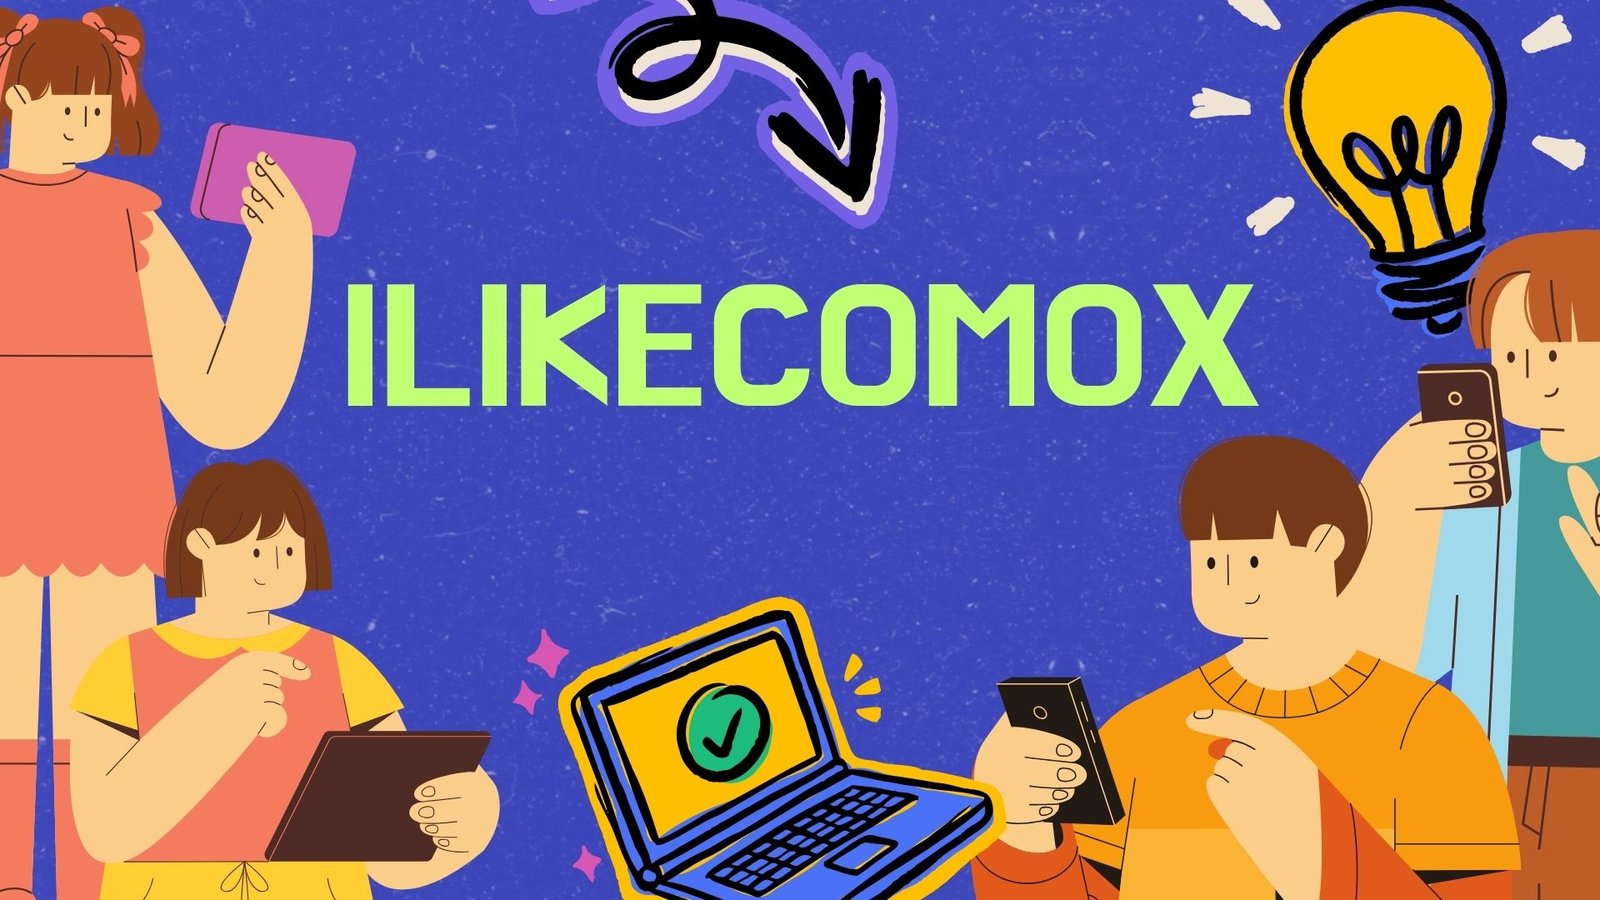 ilikecomox: Complete Review and Details